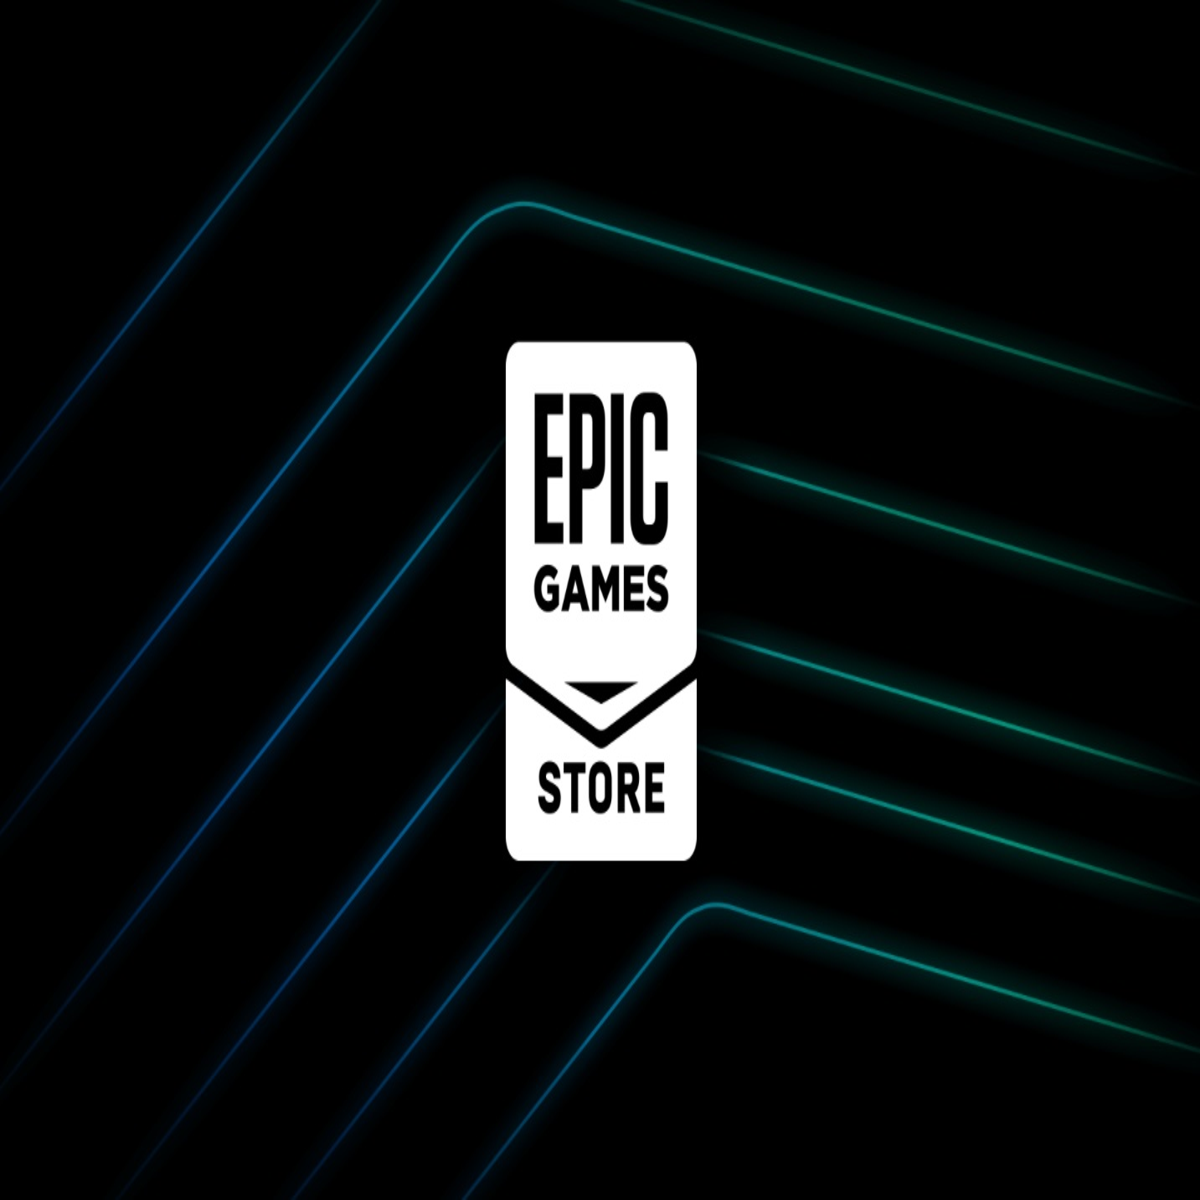 Epic Games Store  Download & Play PC Games, Mods, DLC & More – Epic Games